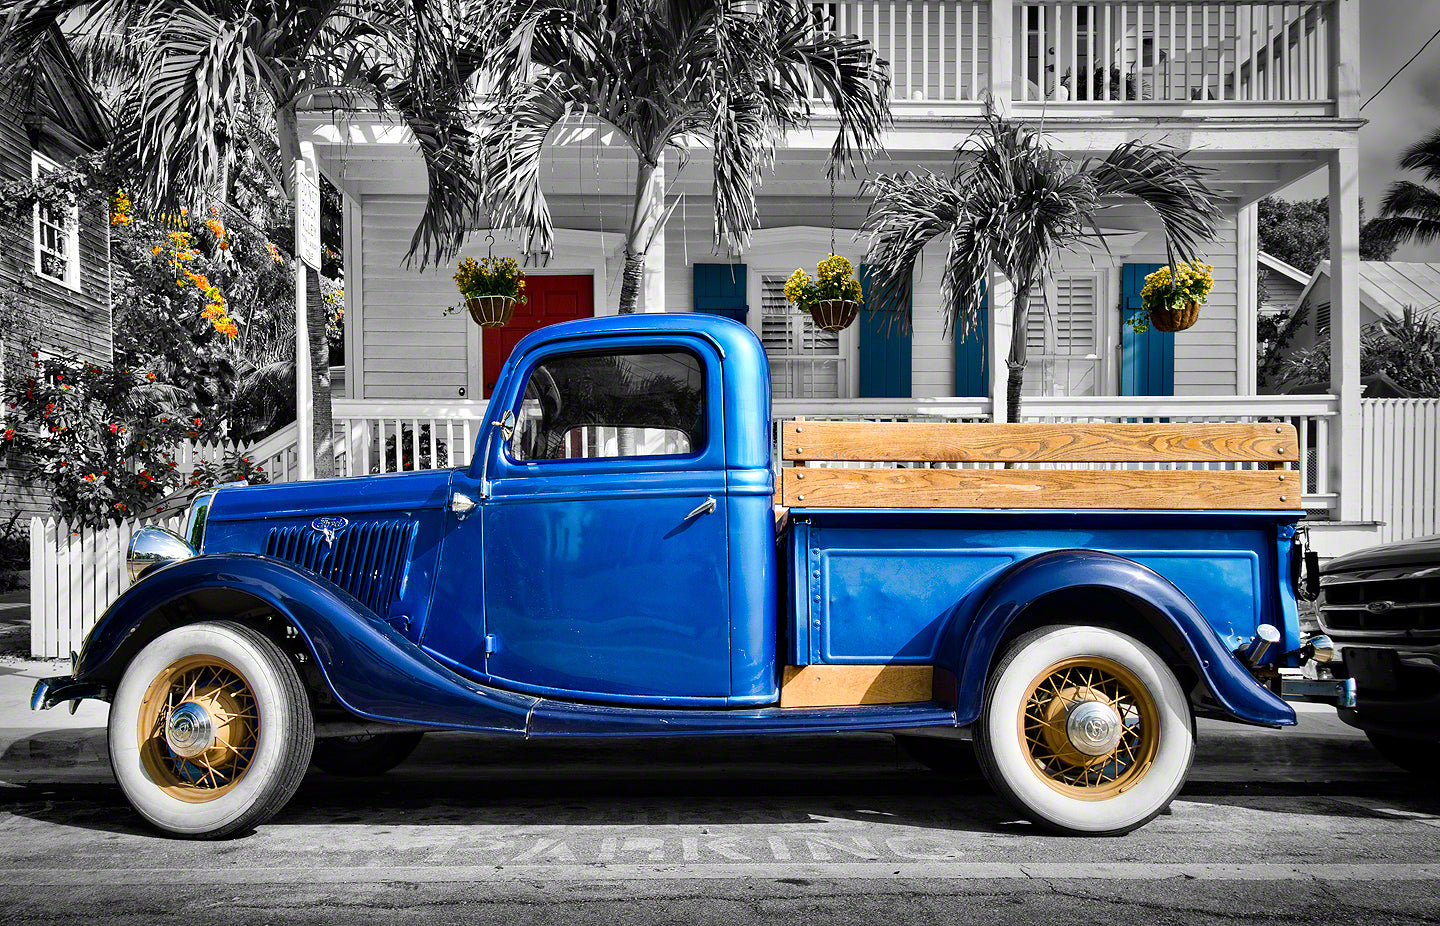 A photo of a 1935 Ford Truck in Key West, Florida